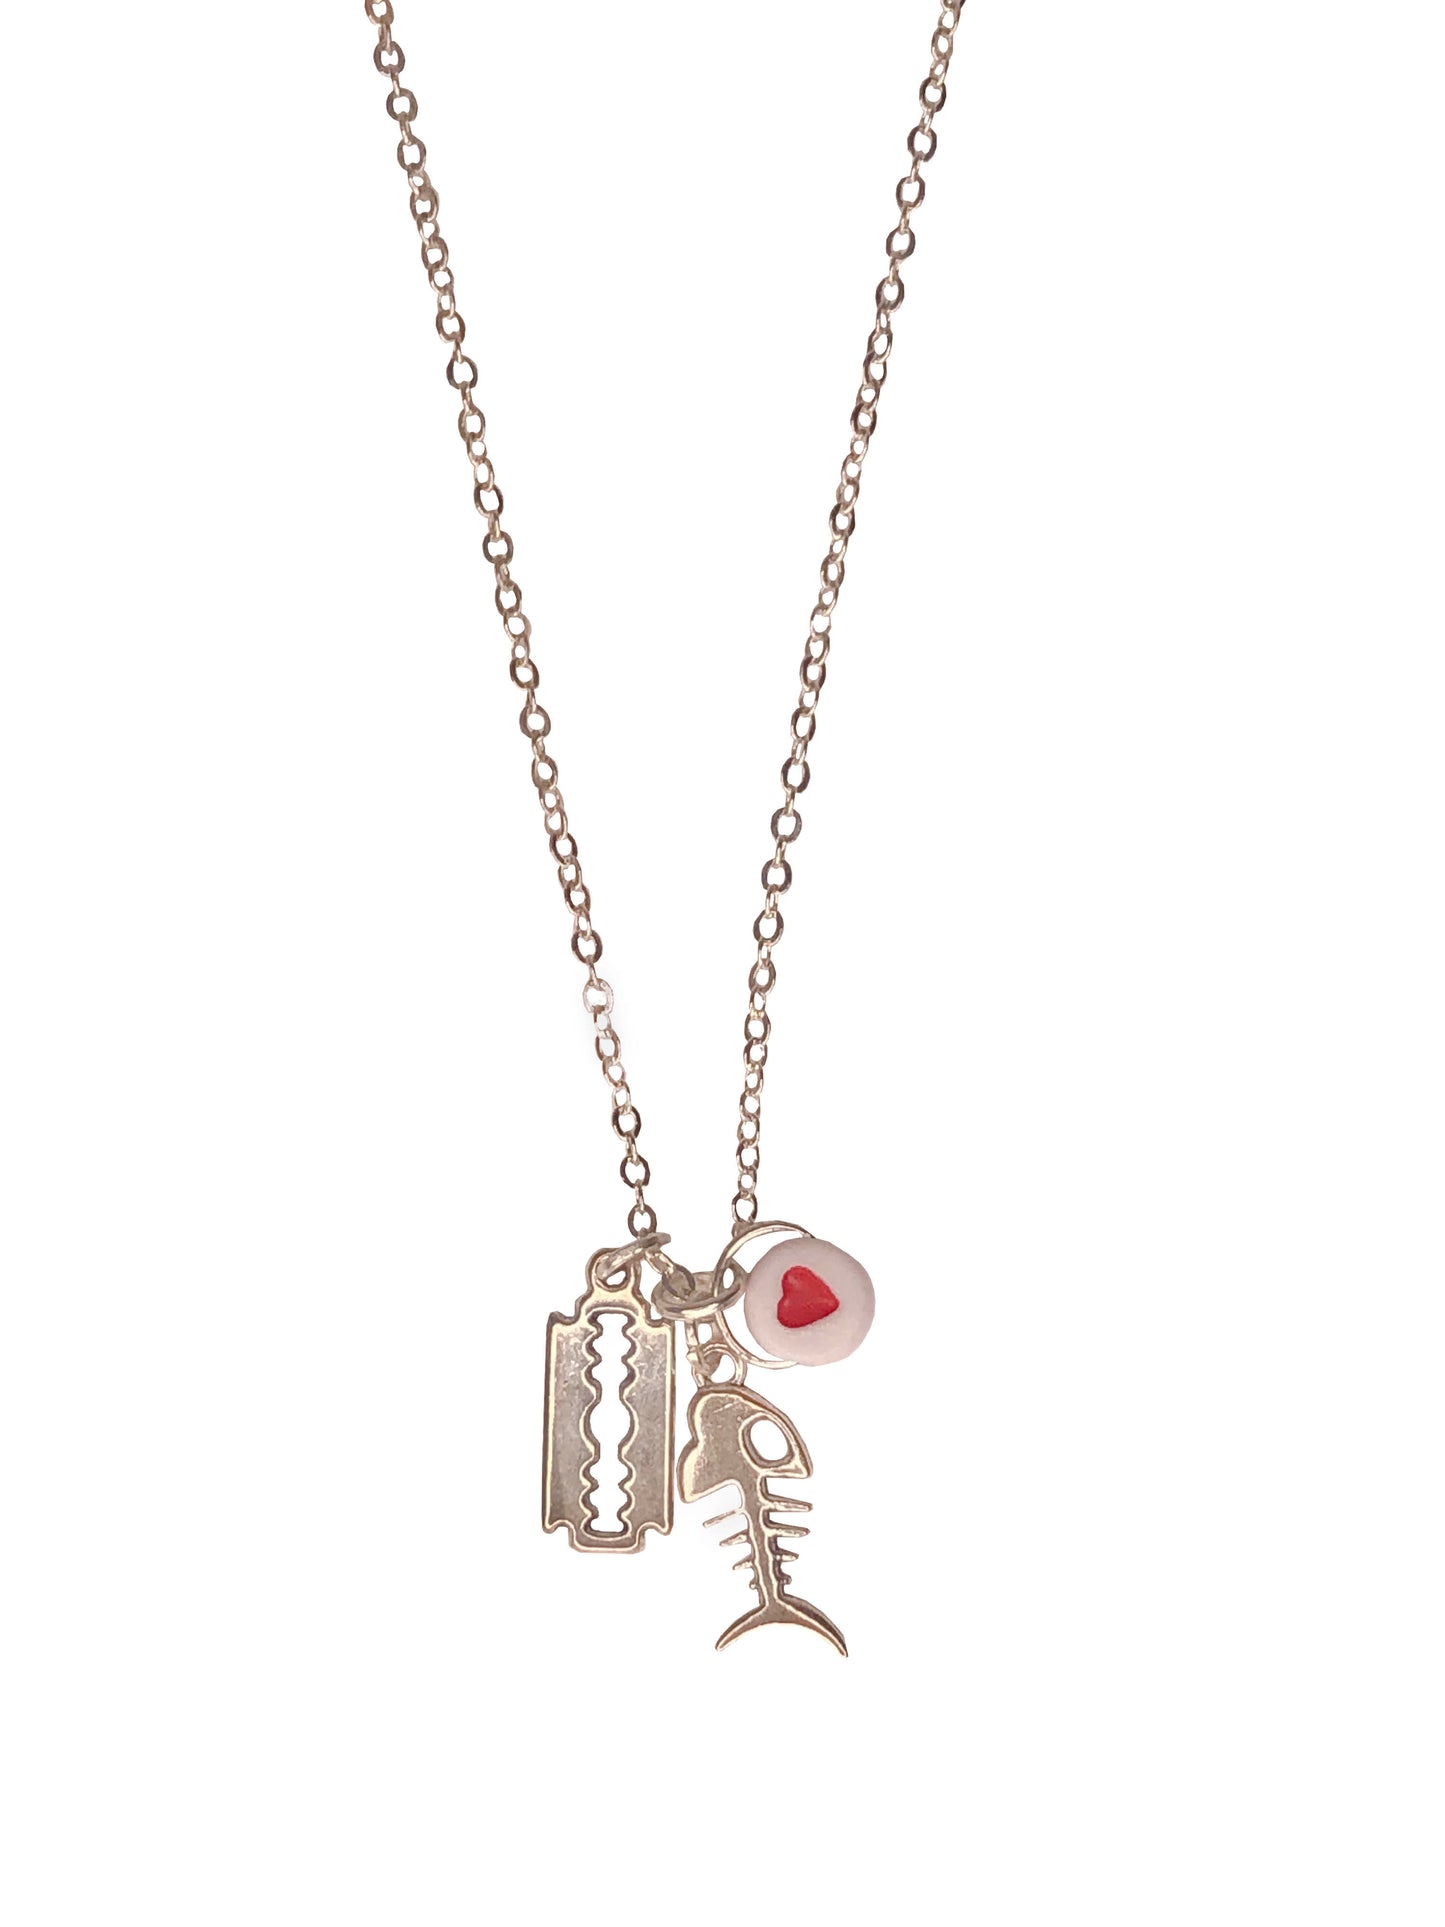 Handmade pendant necklace with a red flat round heart bead, a silver razor blade and skeleton fish charm.